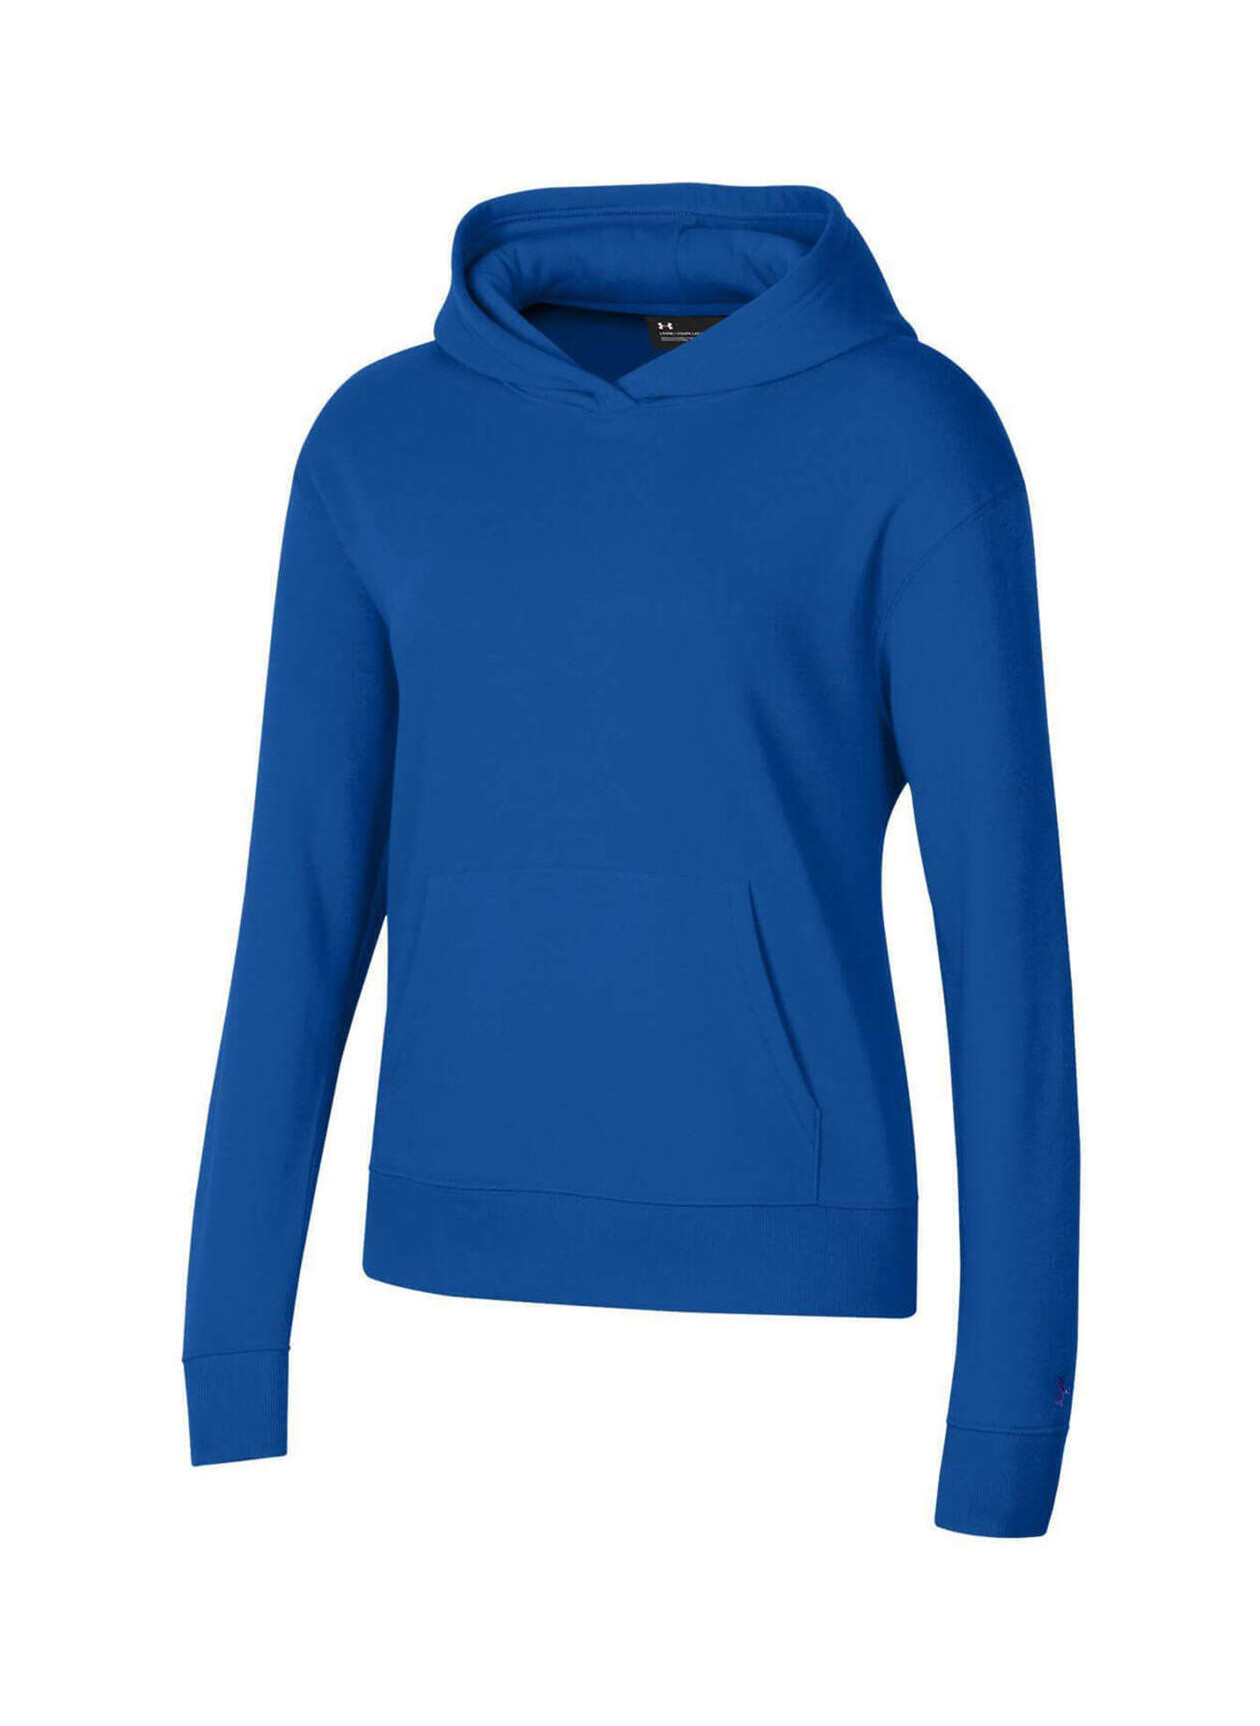 Under Armour Women's Royal All Day Fleece Hoodie